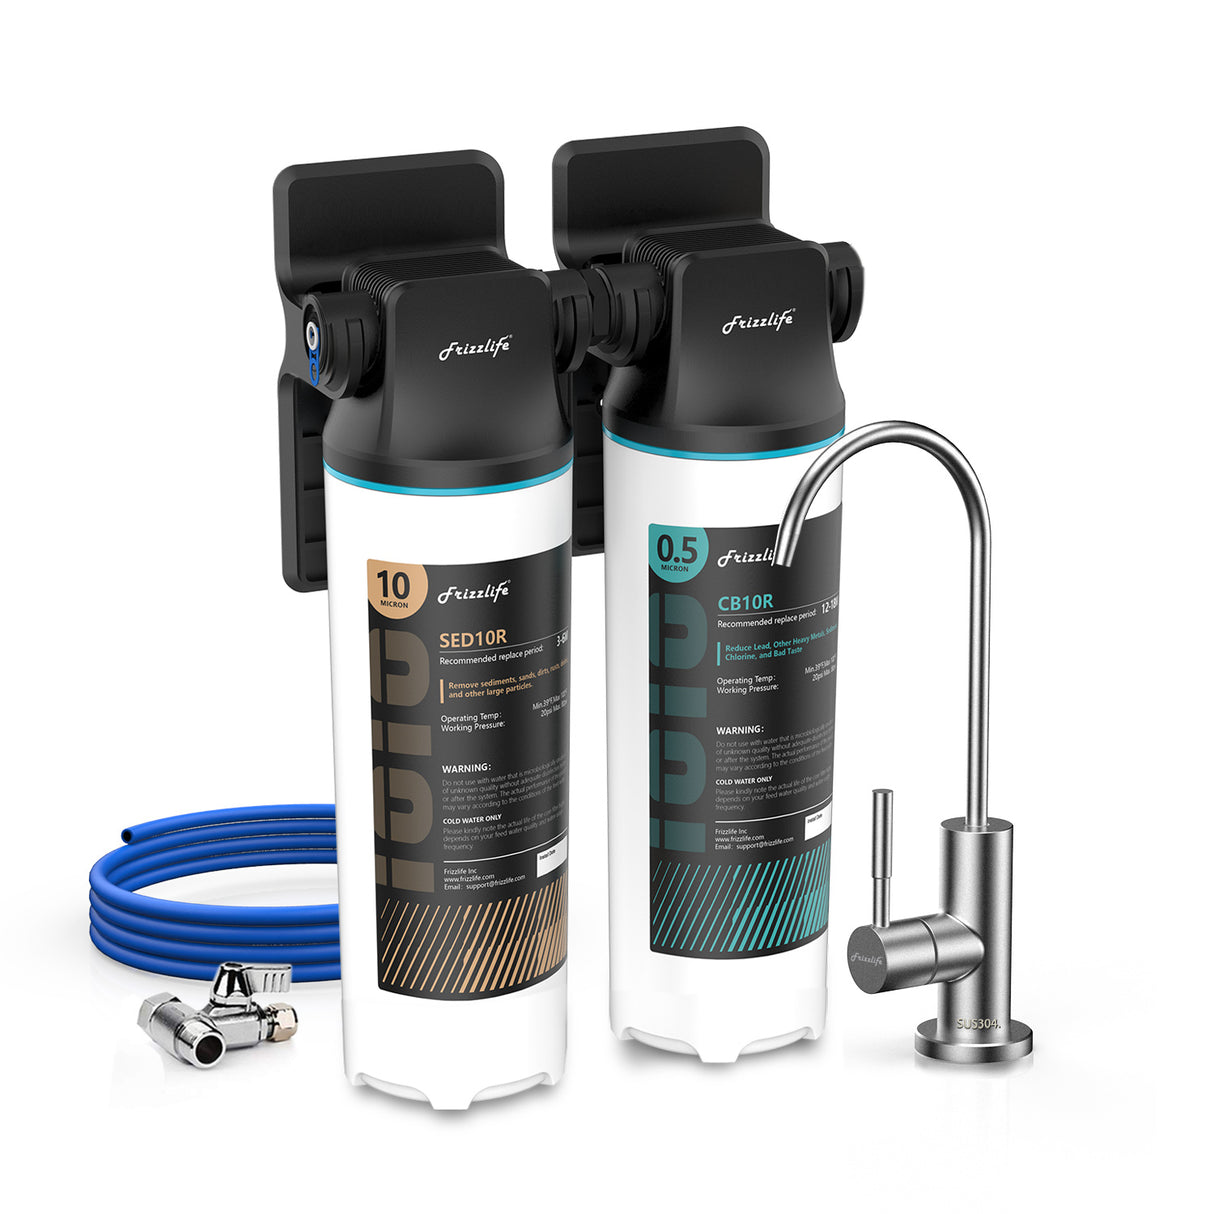 Frizzlife DW10F/DW15F Under Sink Water Filter System with Brushed Nickel Faucet, NSF/ANSI 53&42 Certified Elements